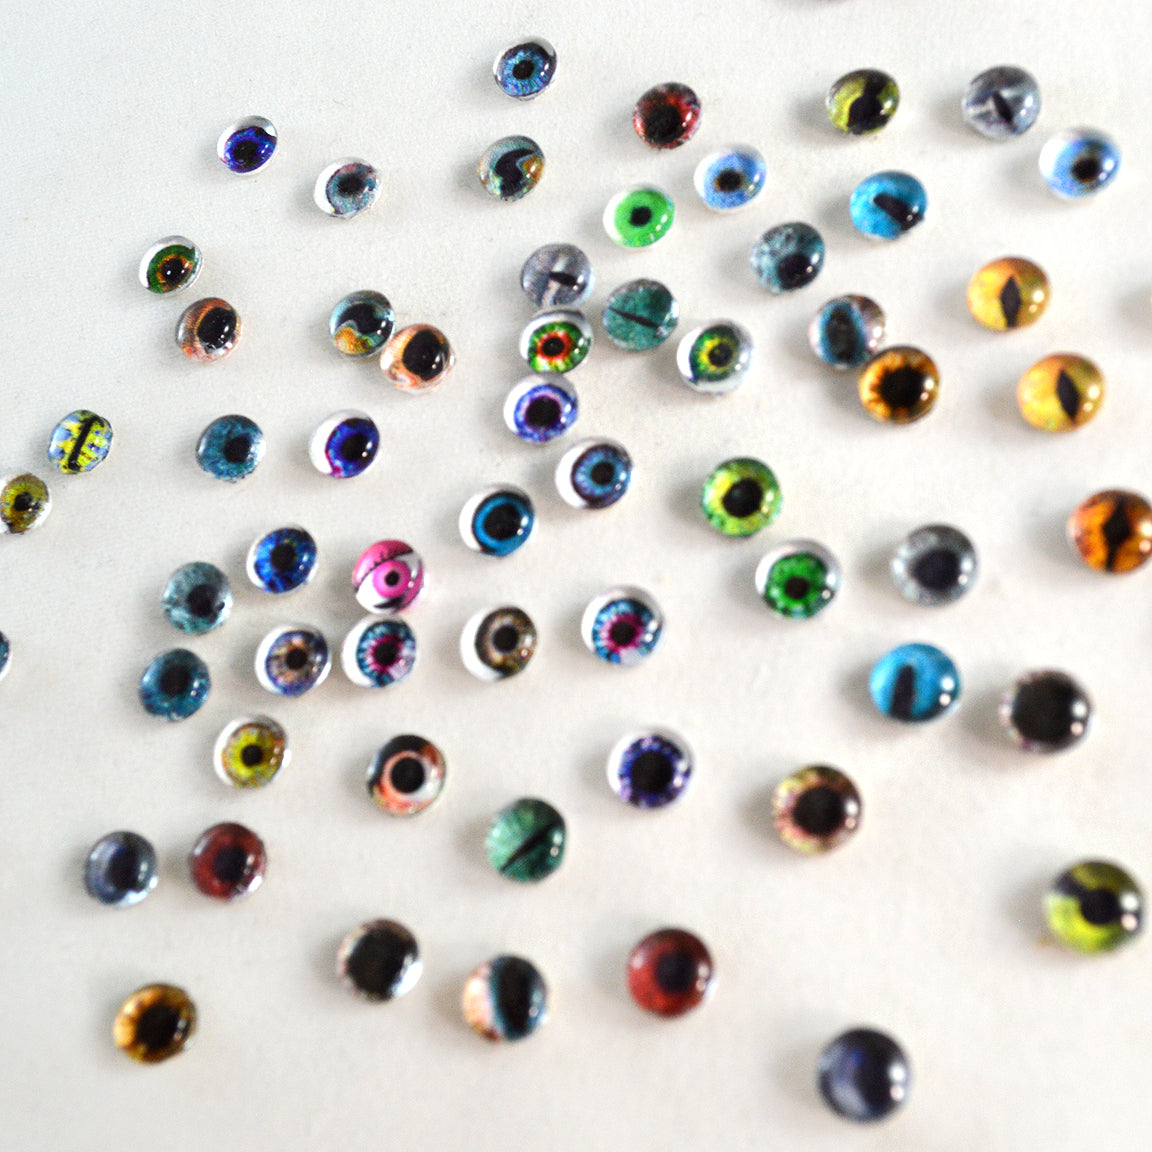 10 Small Glass Beads eye 6 Mm Different Colors 